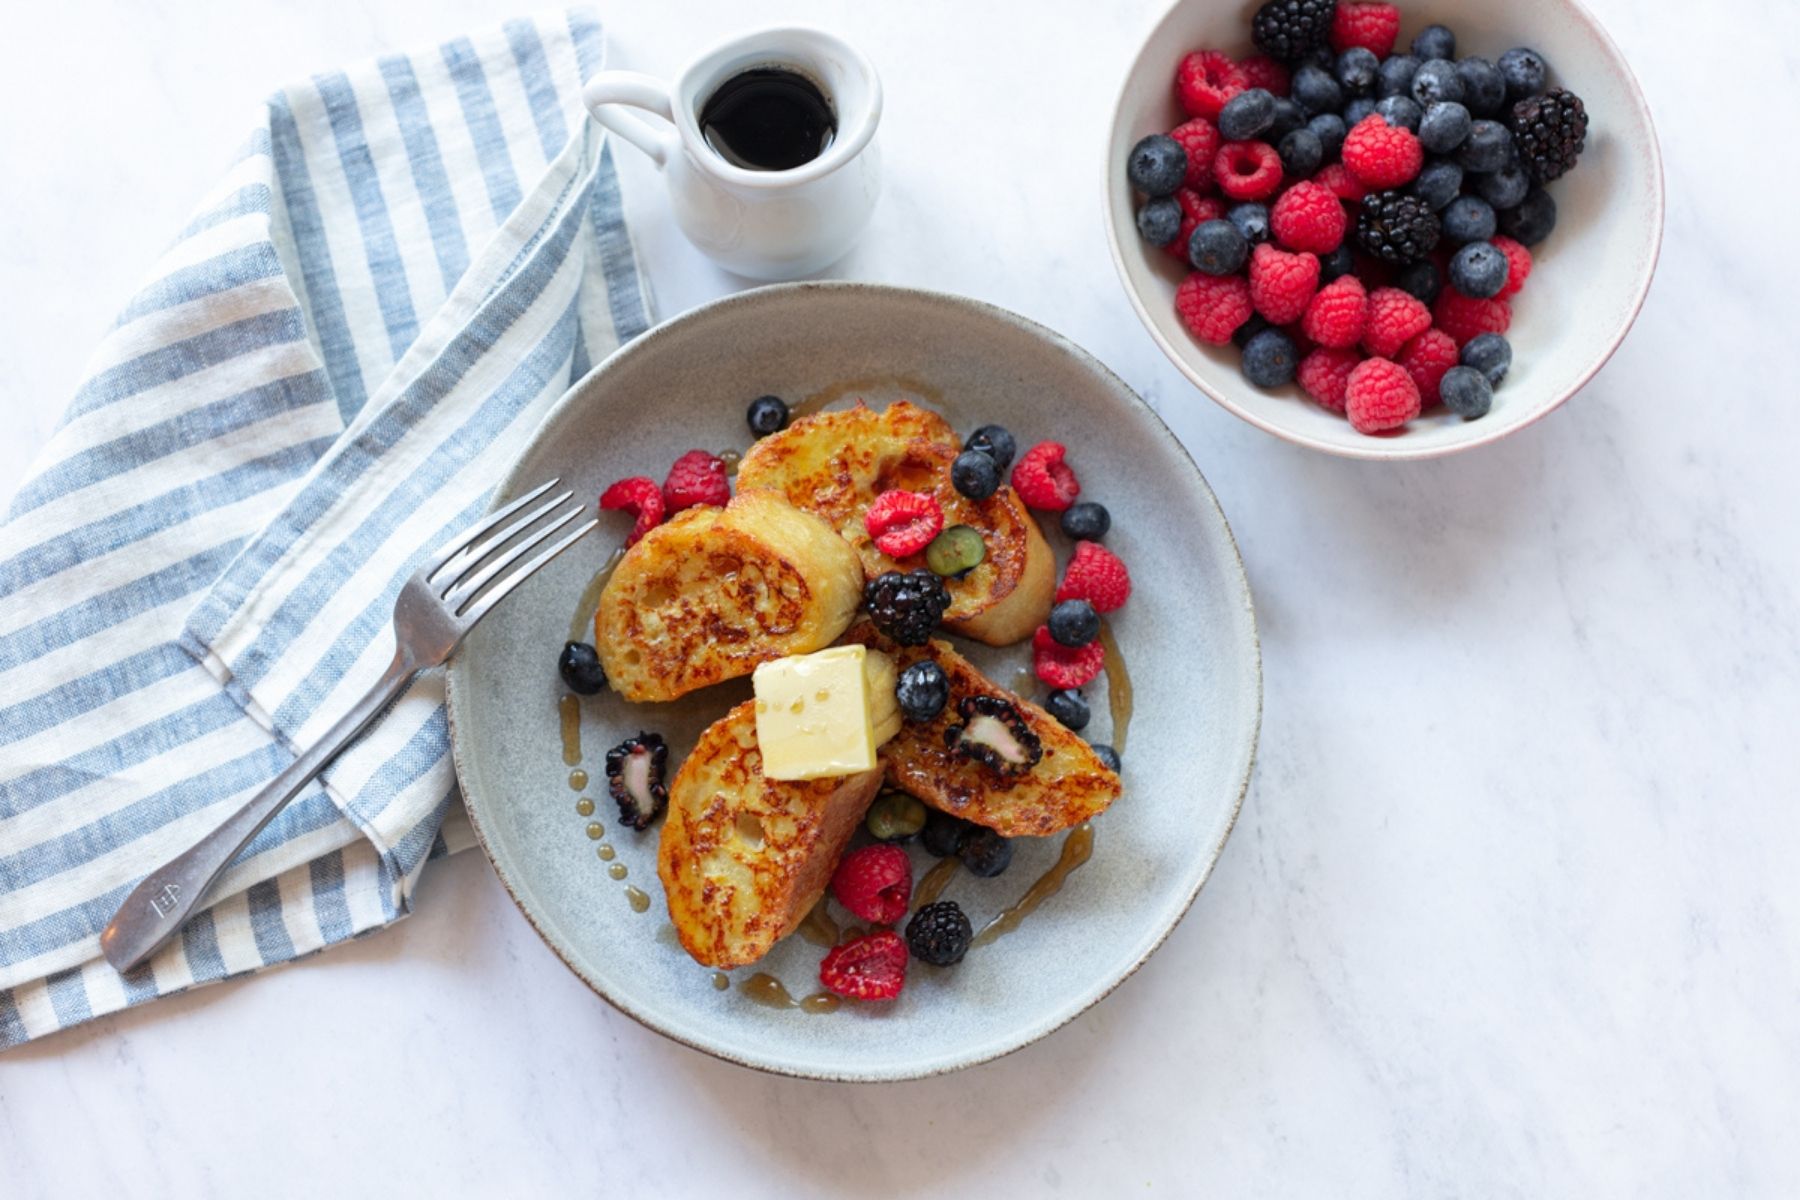 https://cleananddelicious.com/wp-content/uploads/2022/04/sourdough-french-toast-recipe-3.jpg